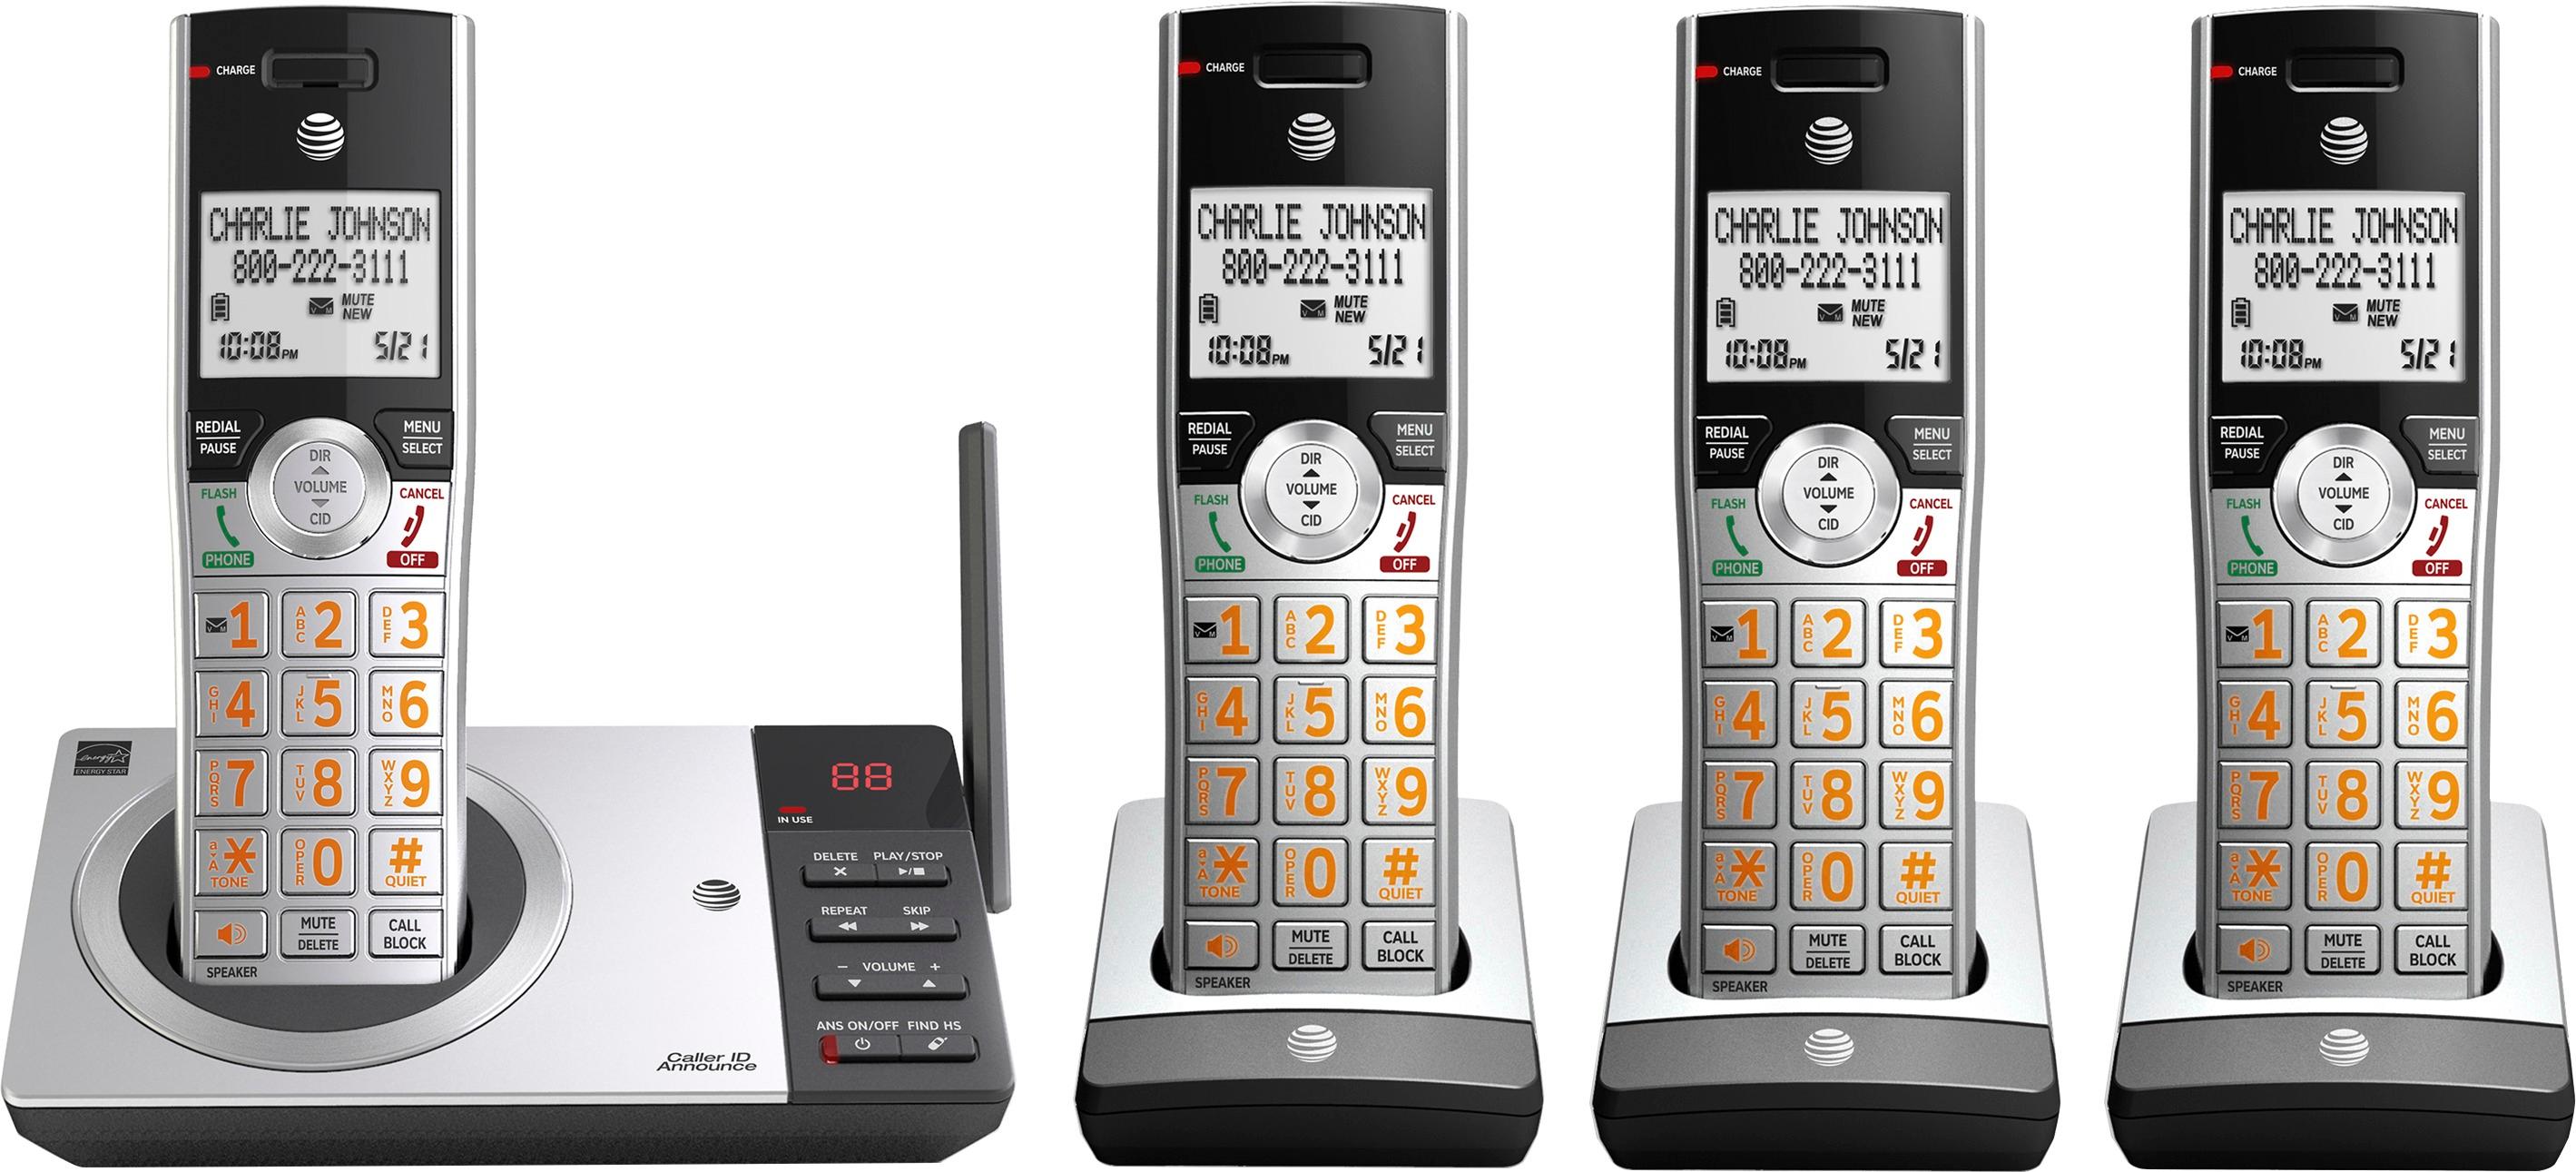 AT&T - CL82407 DECT 6.0 Expandable Cordless Phone System ...